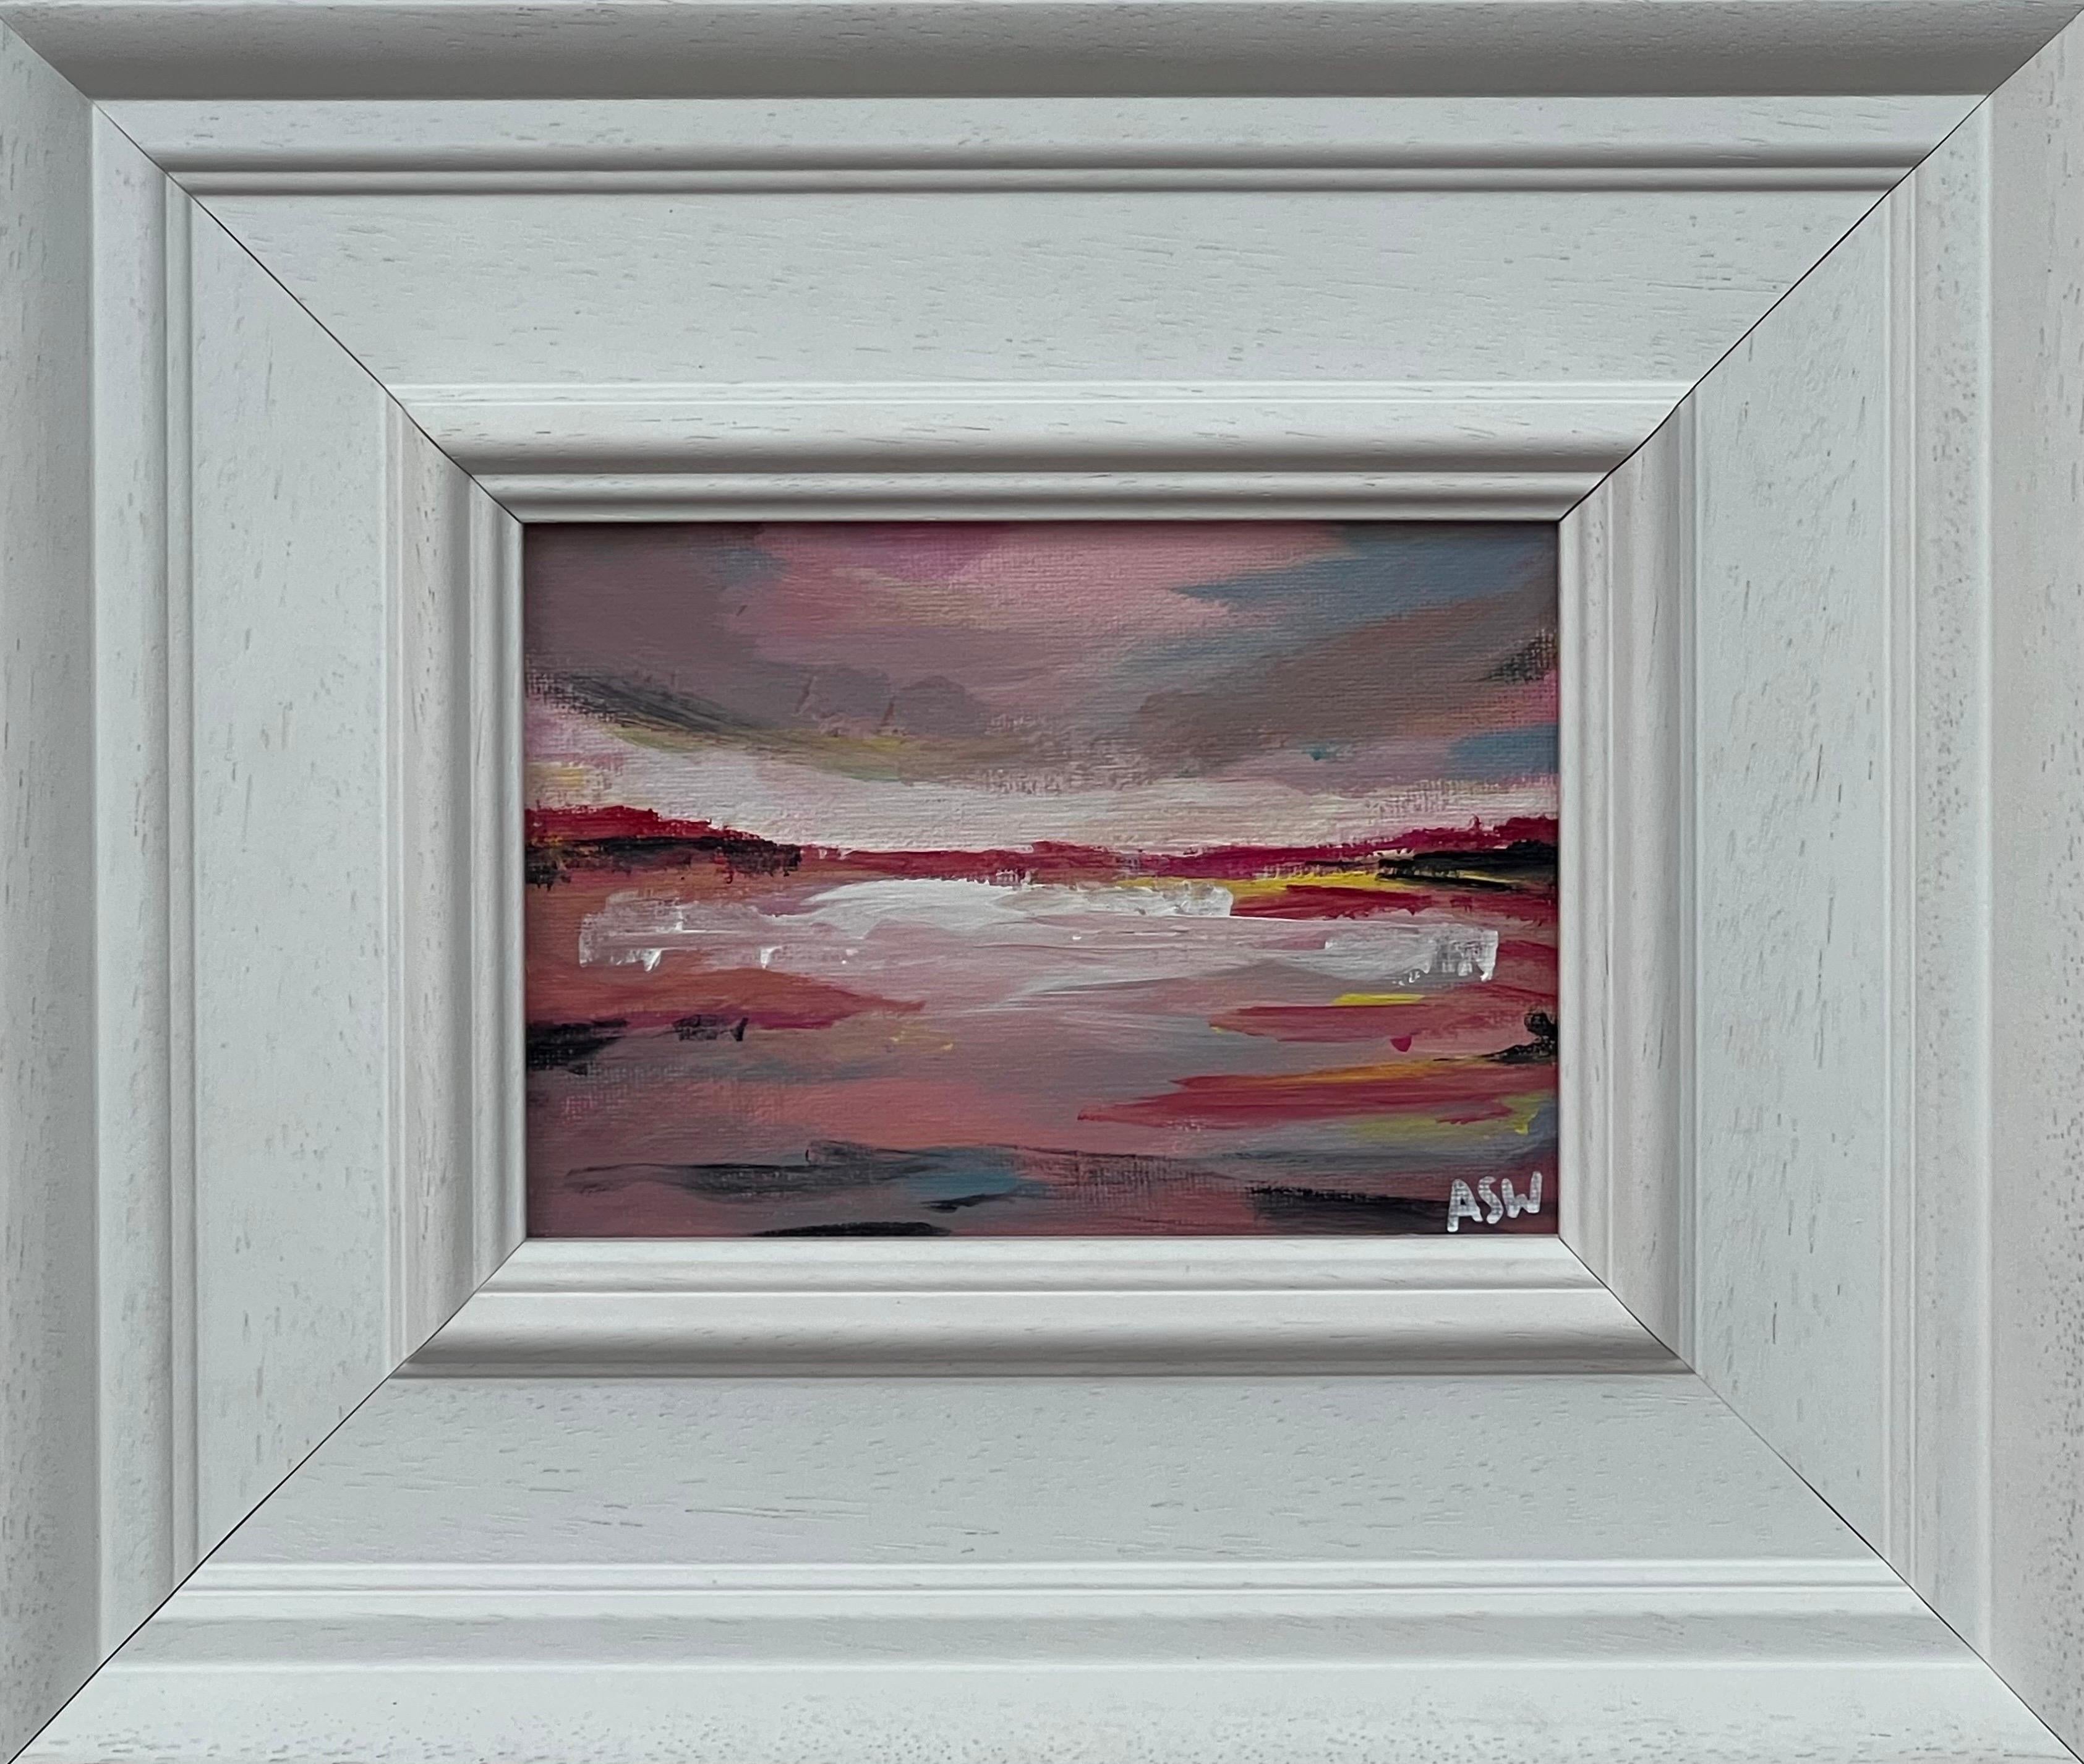 Angela Wakefield Landscape Painting - Miniature Abstract Painting Study with Pink by Contemporary British Artist